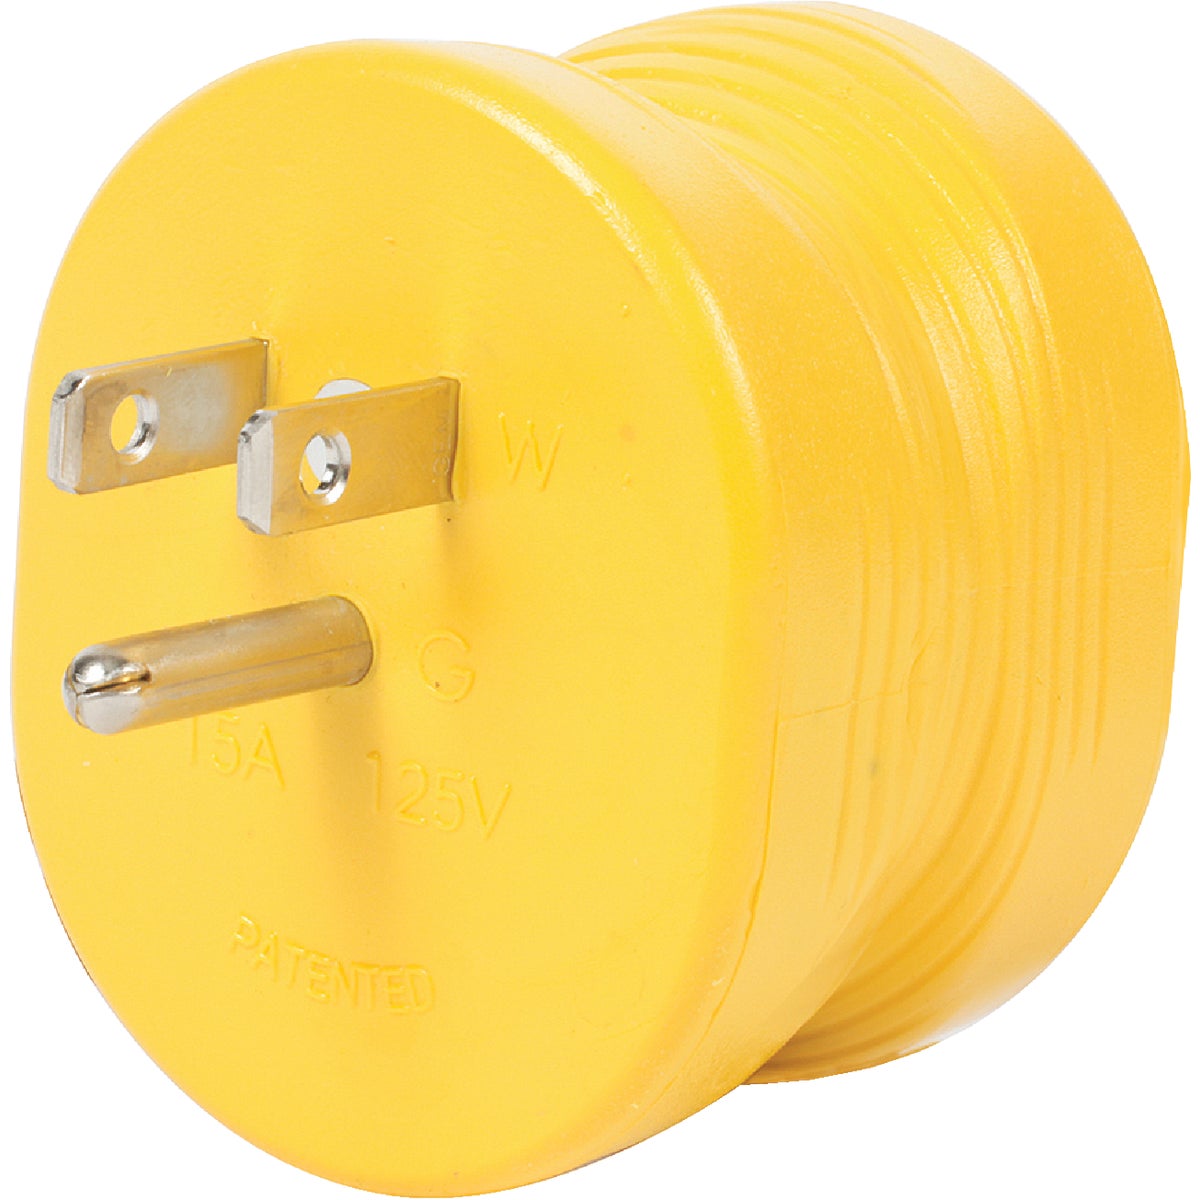 Item 586951, These electrical adapters are equipped with power indicator light and 